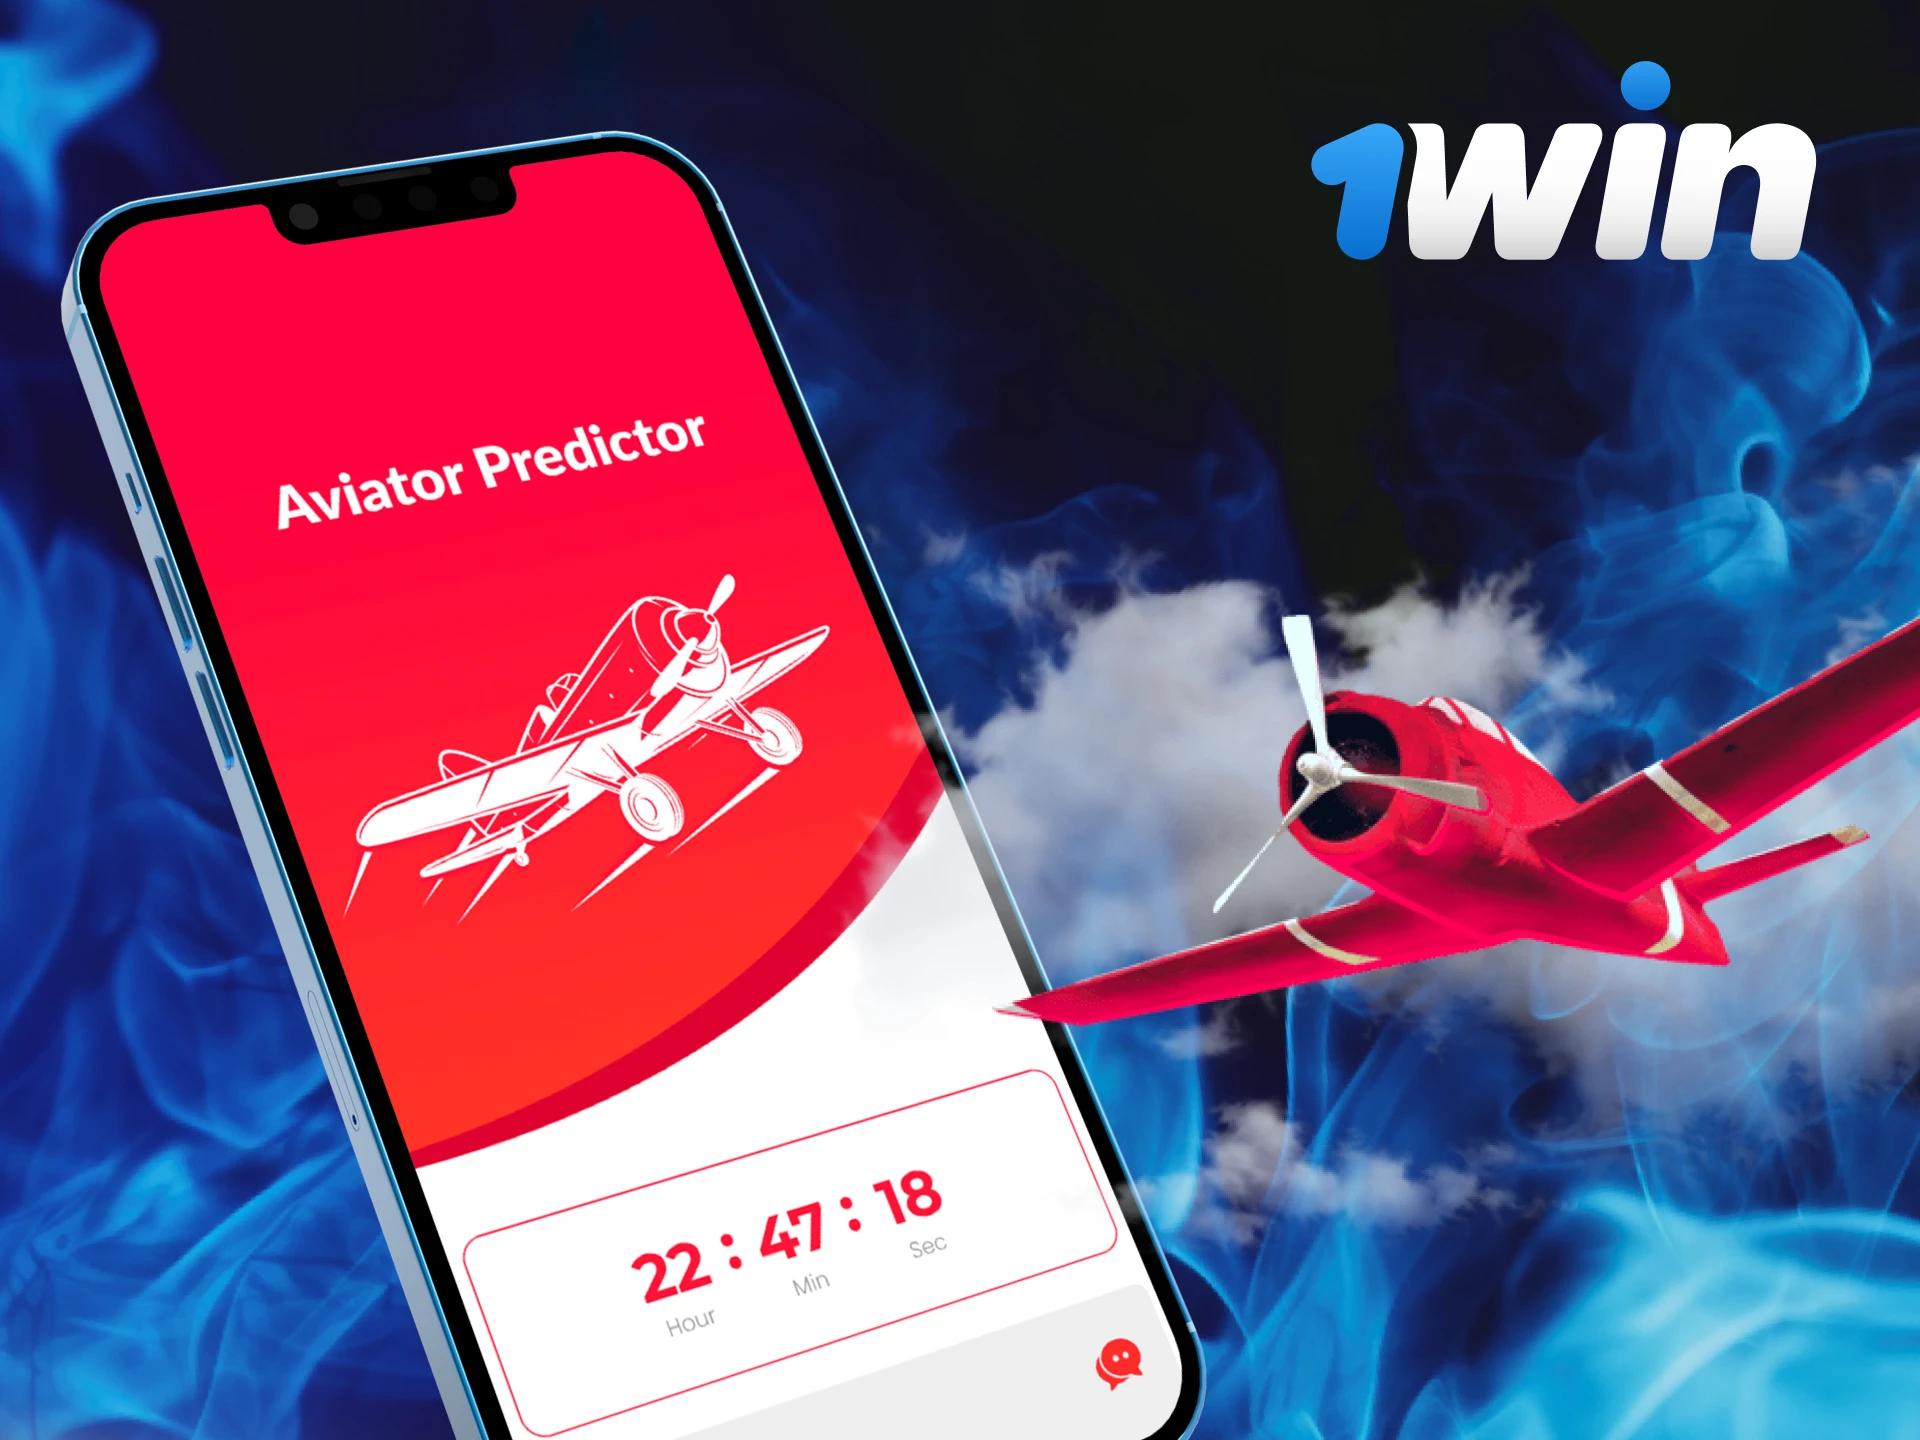 How to create an account in the predictor for Aviator at 1Win casino.